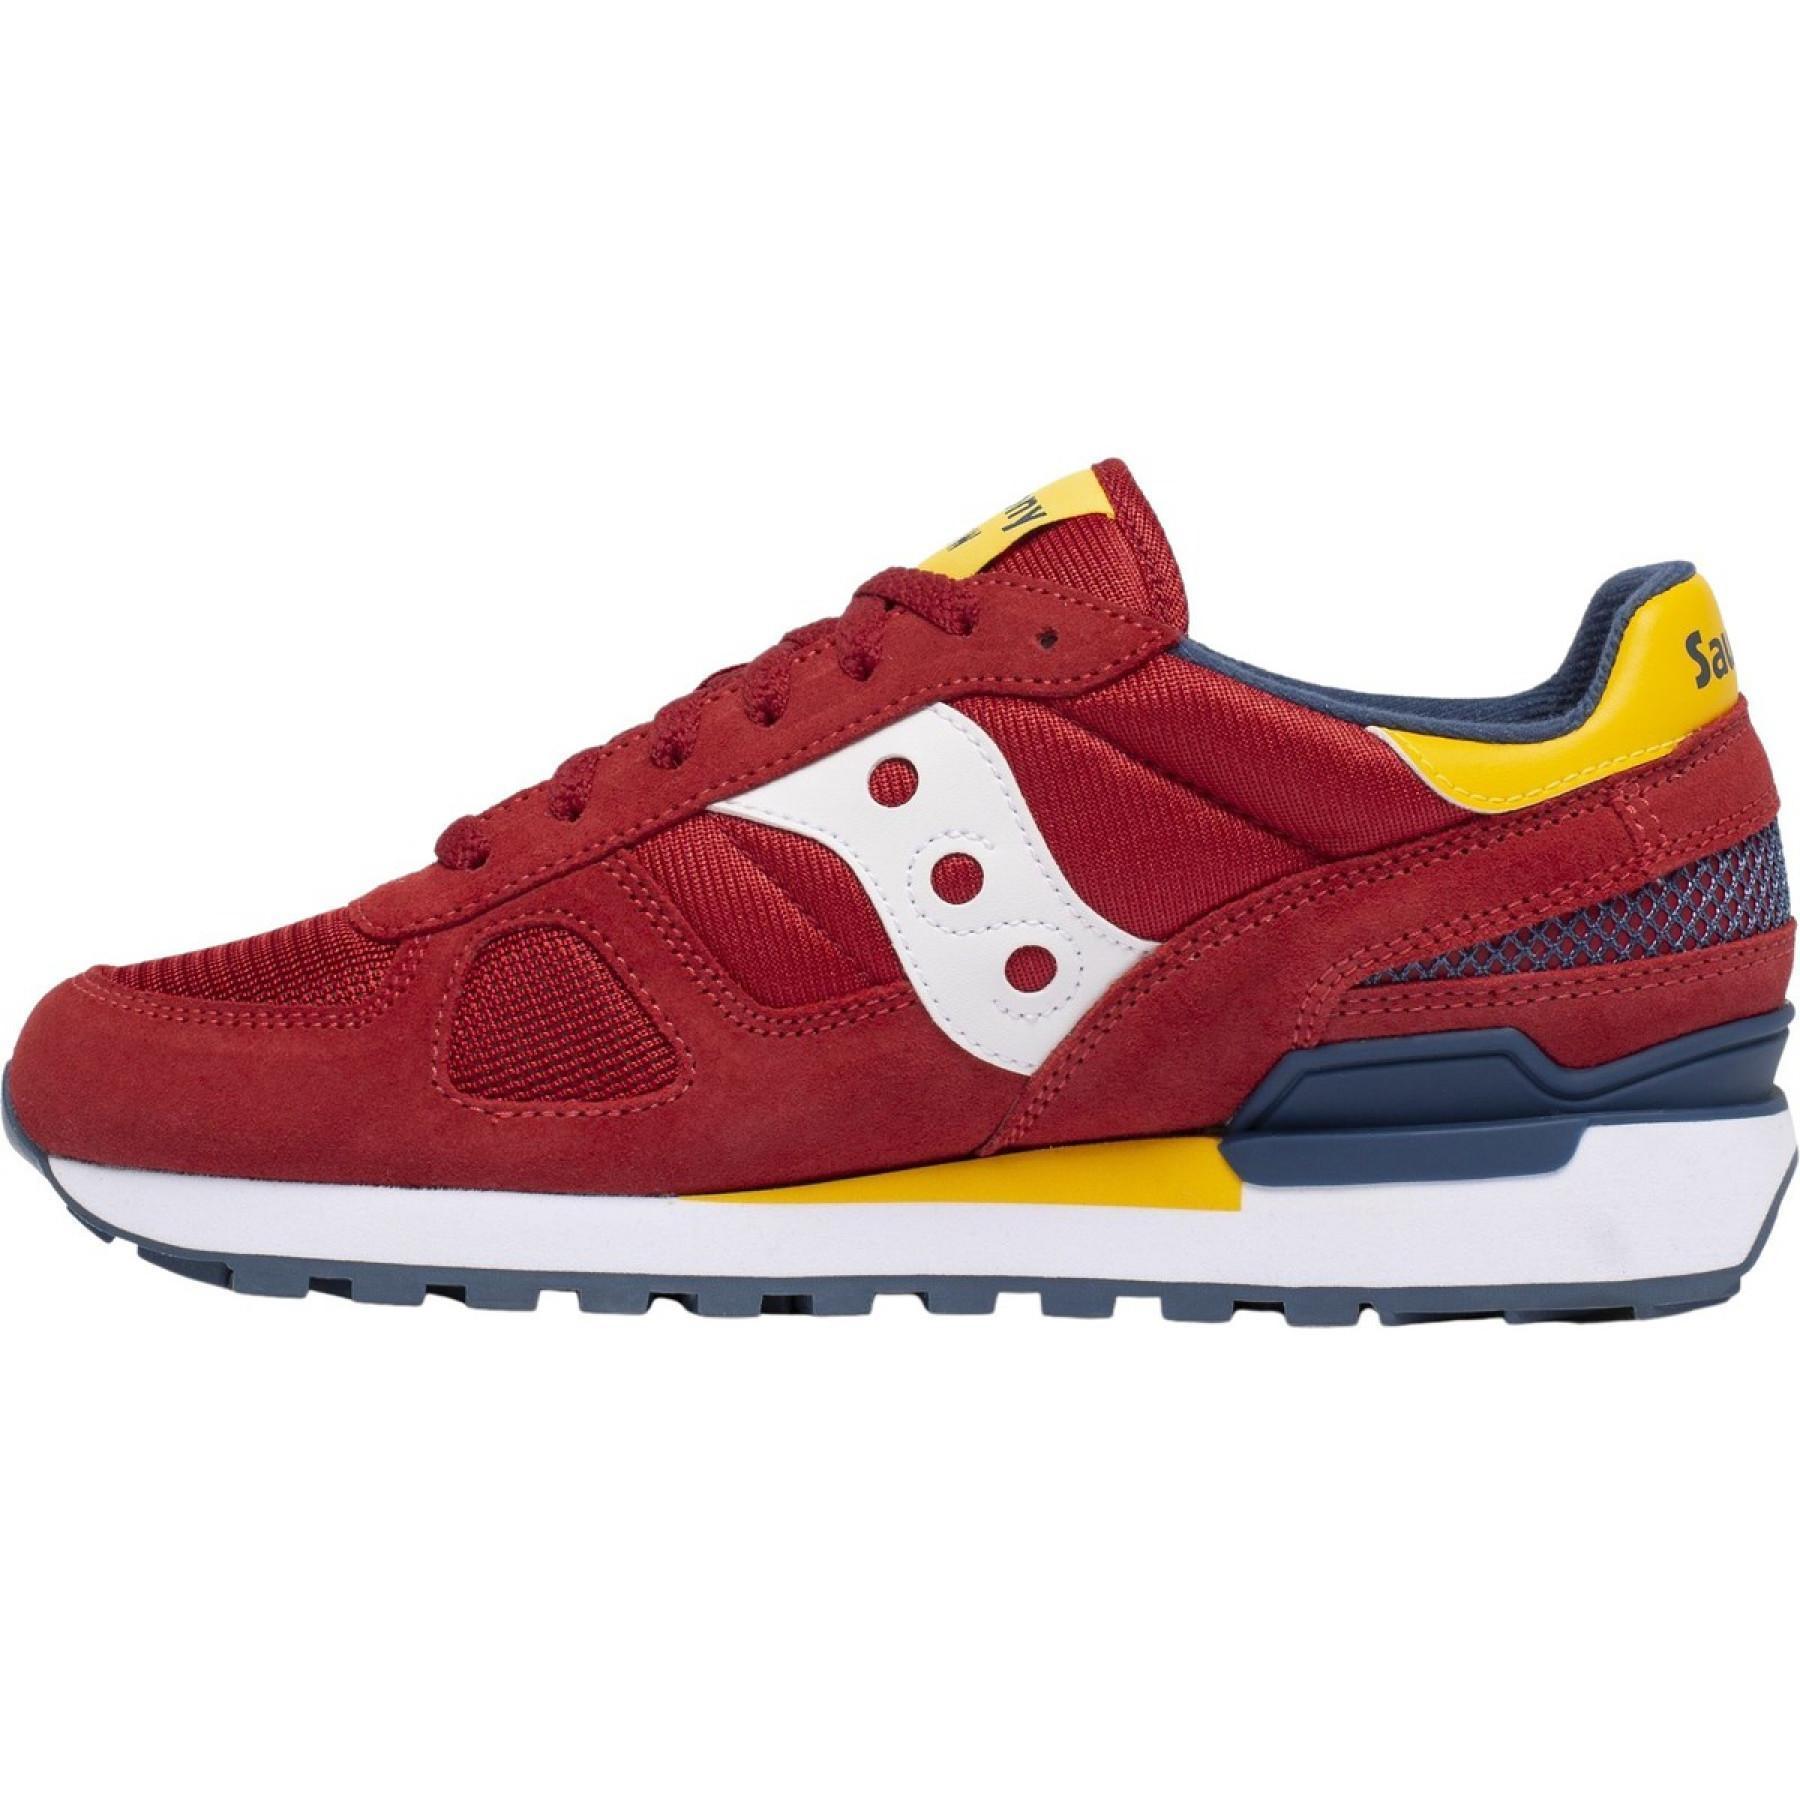 Sneakers Saucony Shadow Original Red/Yellow/Blue